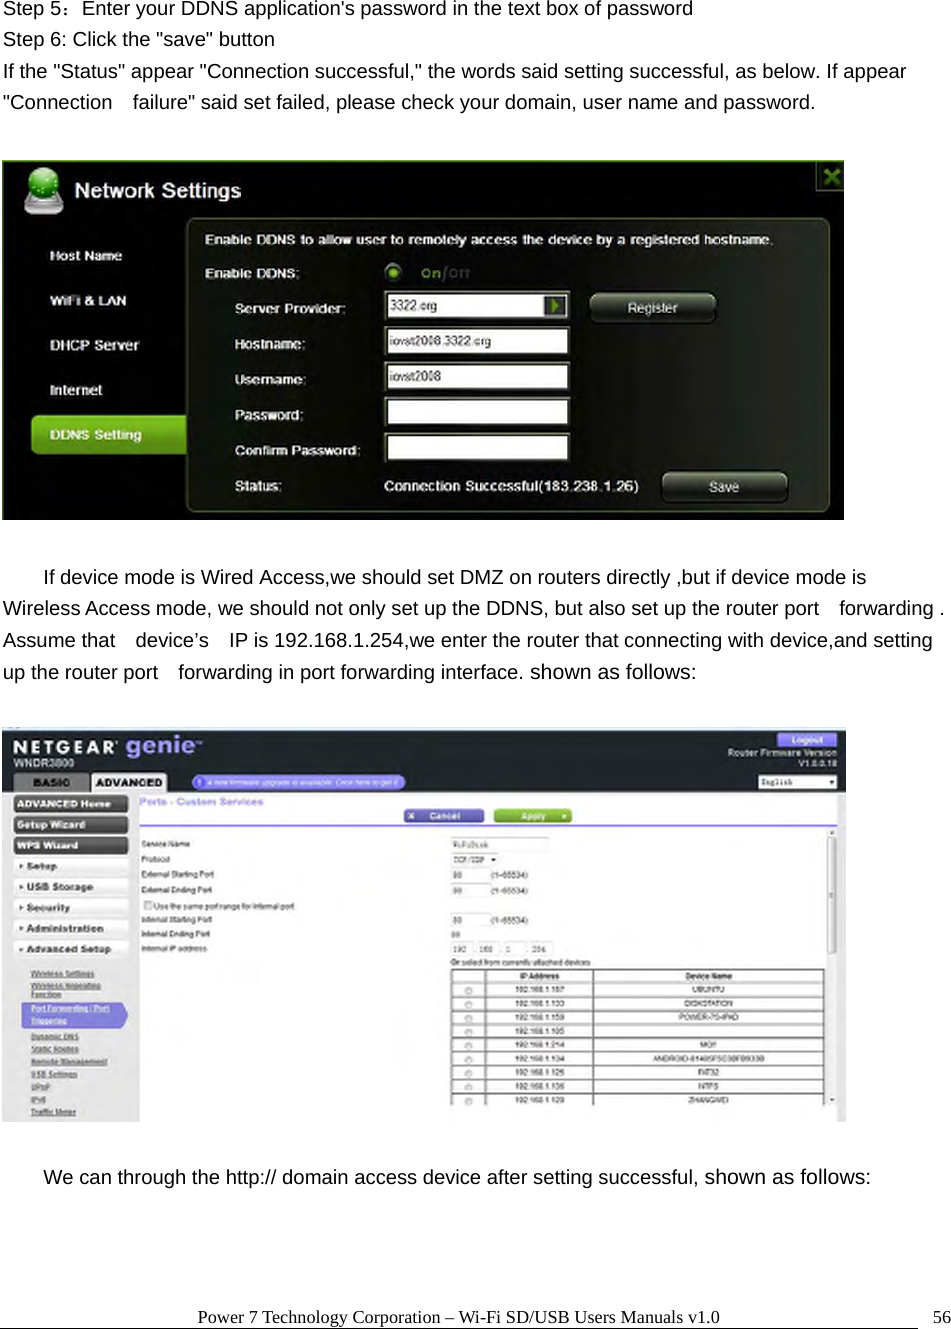 Power 7 Technology Corporation – Wi-Fi SD/USB Users Manuals v1.0  56Step 5：Enter your DDNS application&apos;s password in the text box of password Step 6: Click the &quot;save&quot; button If the &quot;Status&quot; appear &quot;Connection successful,&quot; the words said setting successful, as below. If appear &quot;Connection    failure&quot; said set failed, please check your domain, user name and password.    If device mode is Wired Access,we should set DMZ on routers directly ,but if device mode is   Wireless Access mode, we should not only set up the DDNS, but also set up the router port    forwarding . Assume that    device’s    IP is 192.168.1.254,we enter the router that connecting with device,and setting up the router port    forwarding in port forwarding interface. shown as follows:    We can through the http:// domain access device after setting successful, shown as follows: 